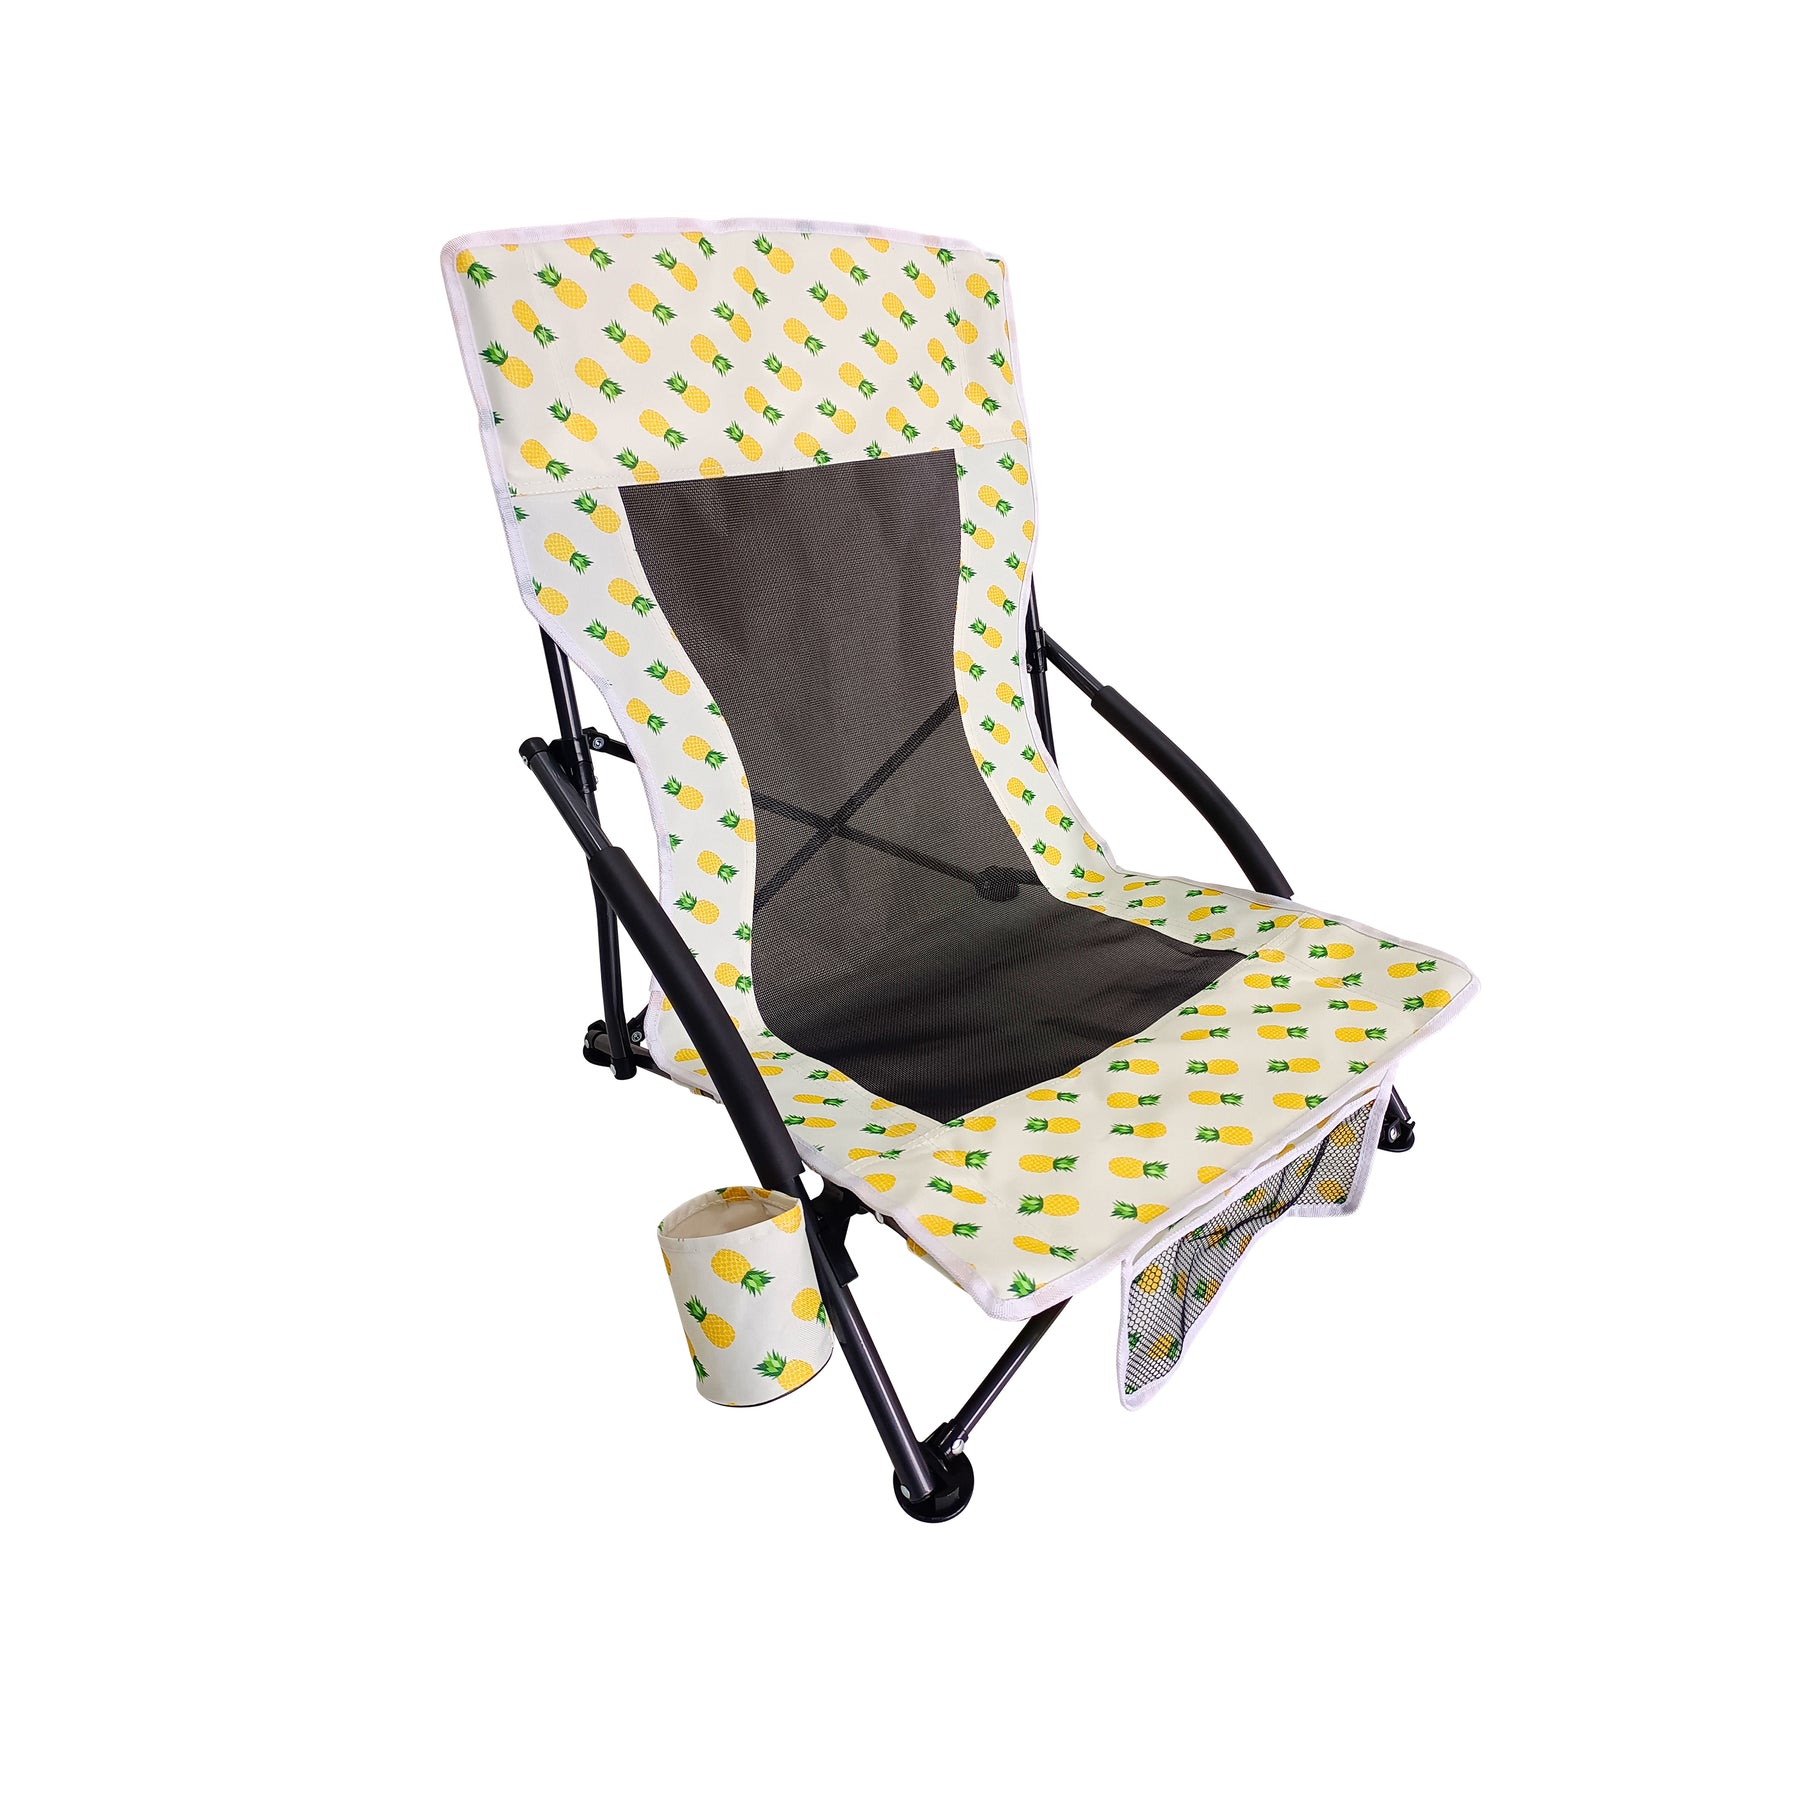 Bliss Hammocks Collapsible Beach Chair with Cup Holders. Pineapple Variation is a white color with a pineapple pattern.